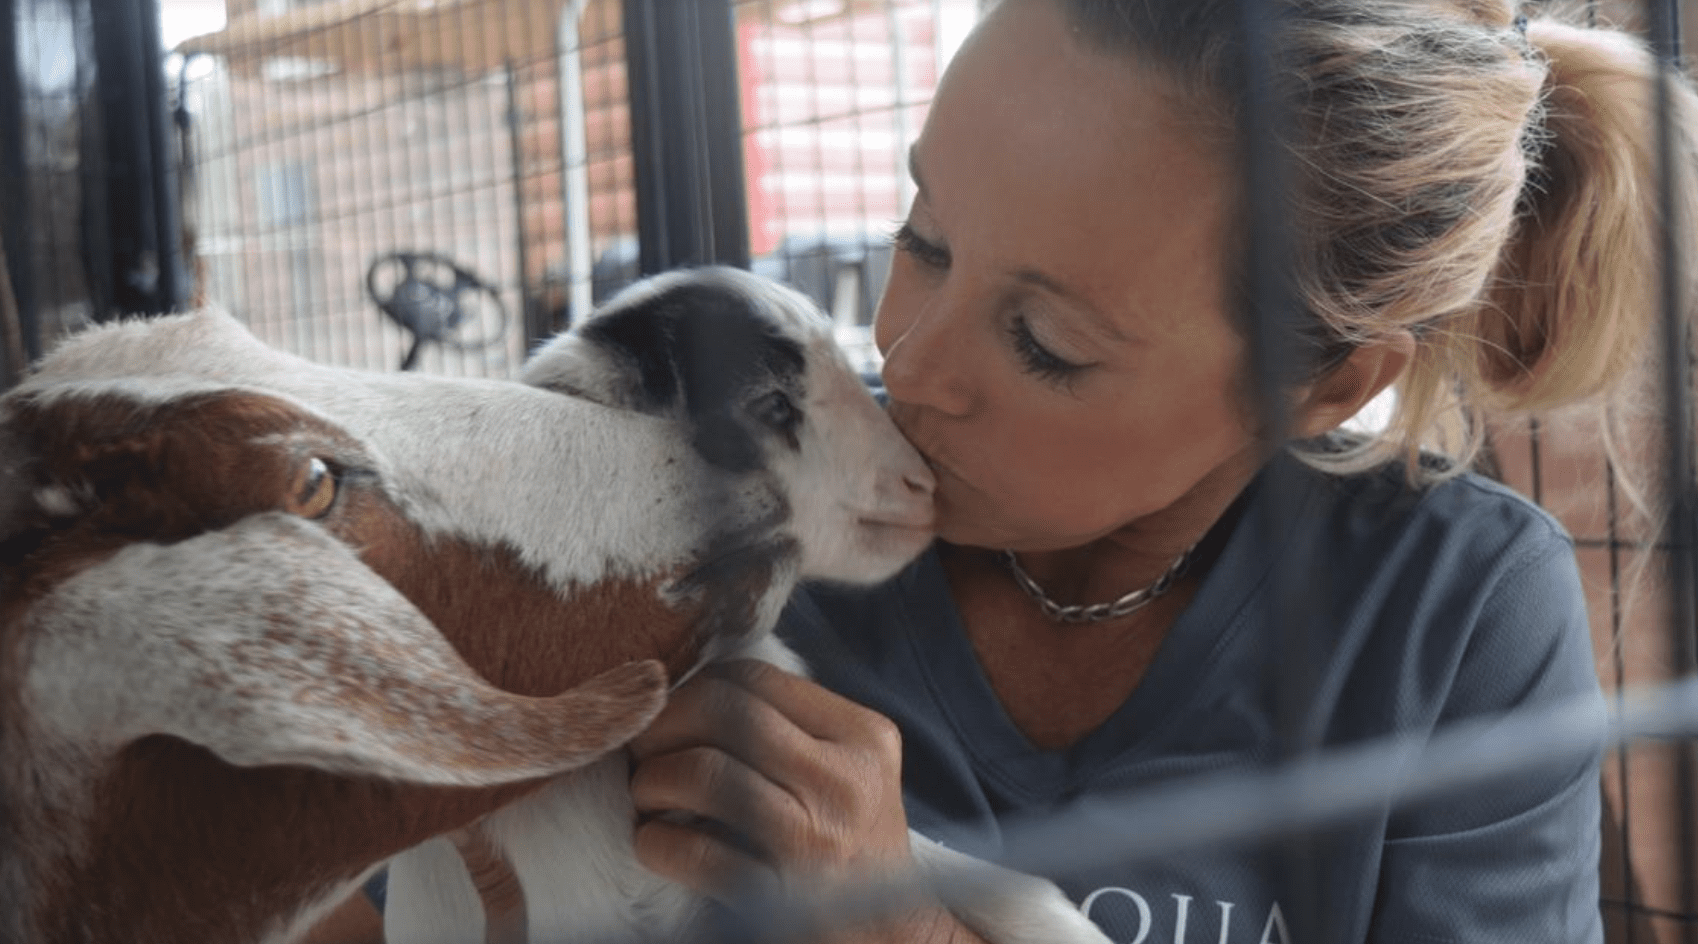 Kissing a baby goat